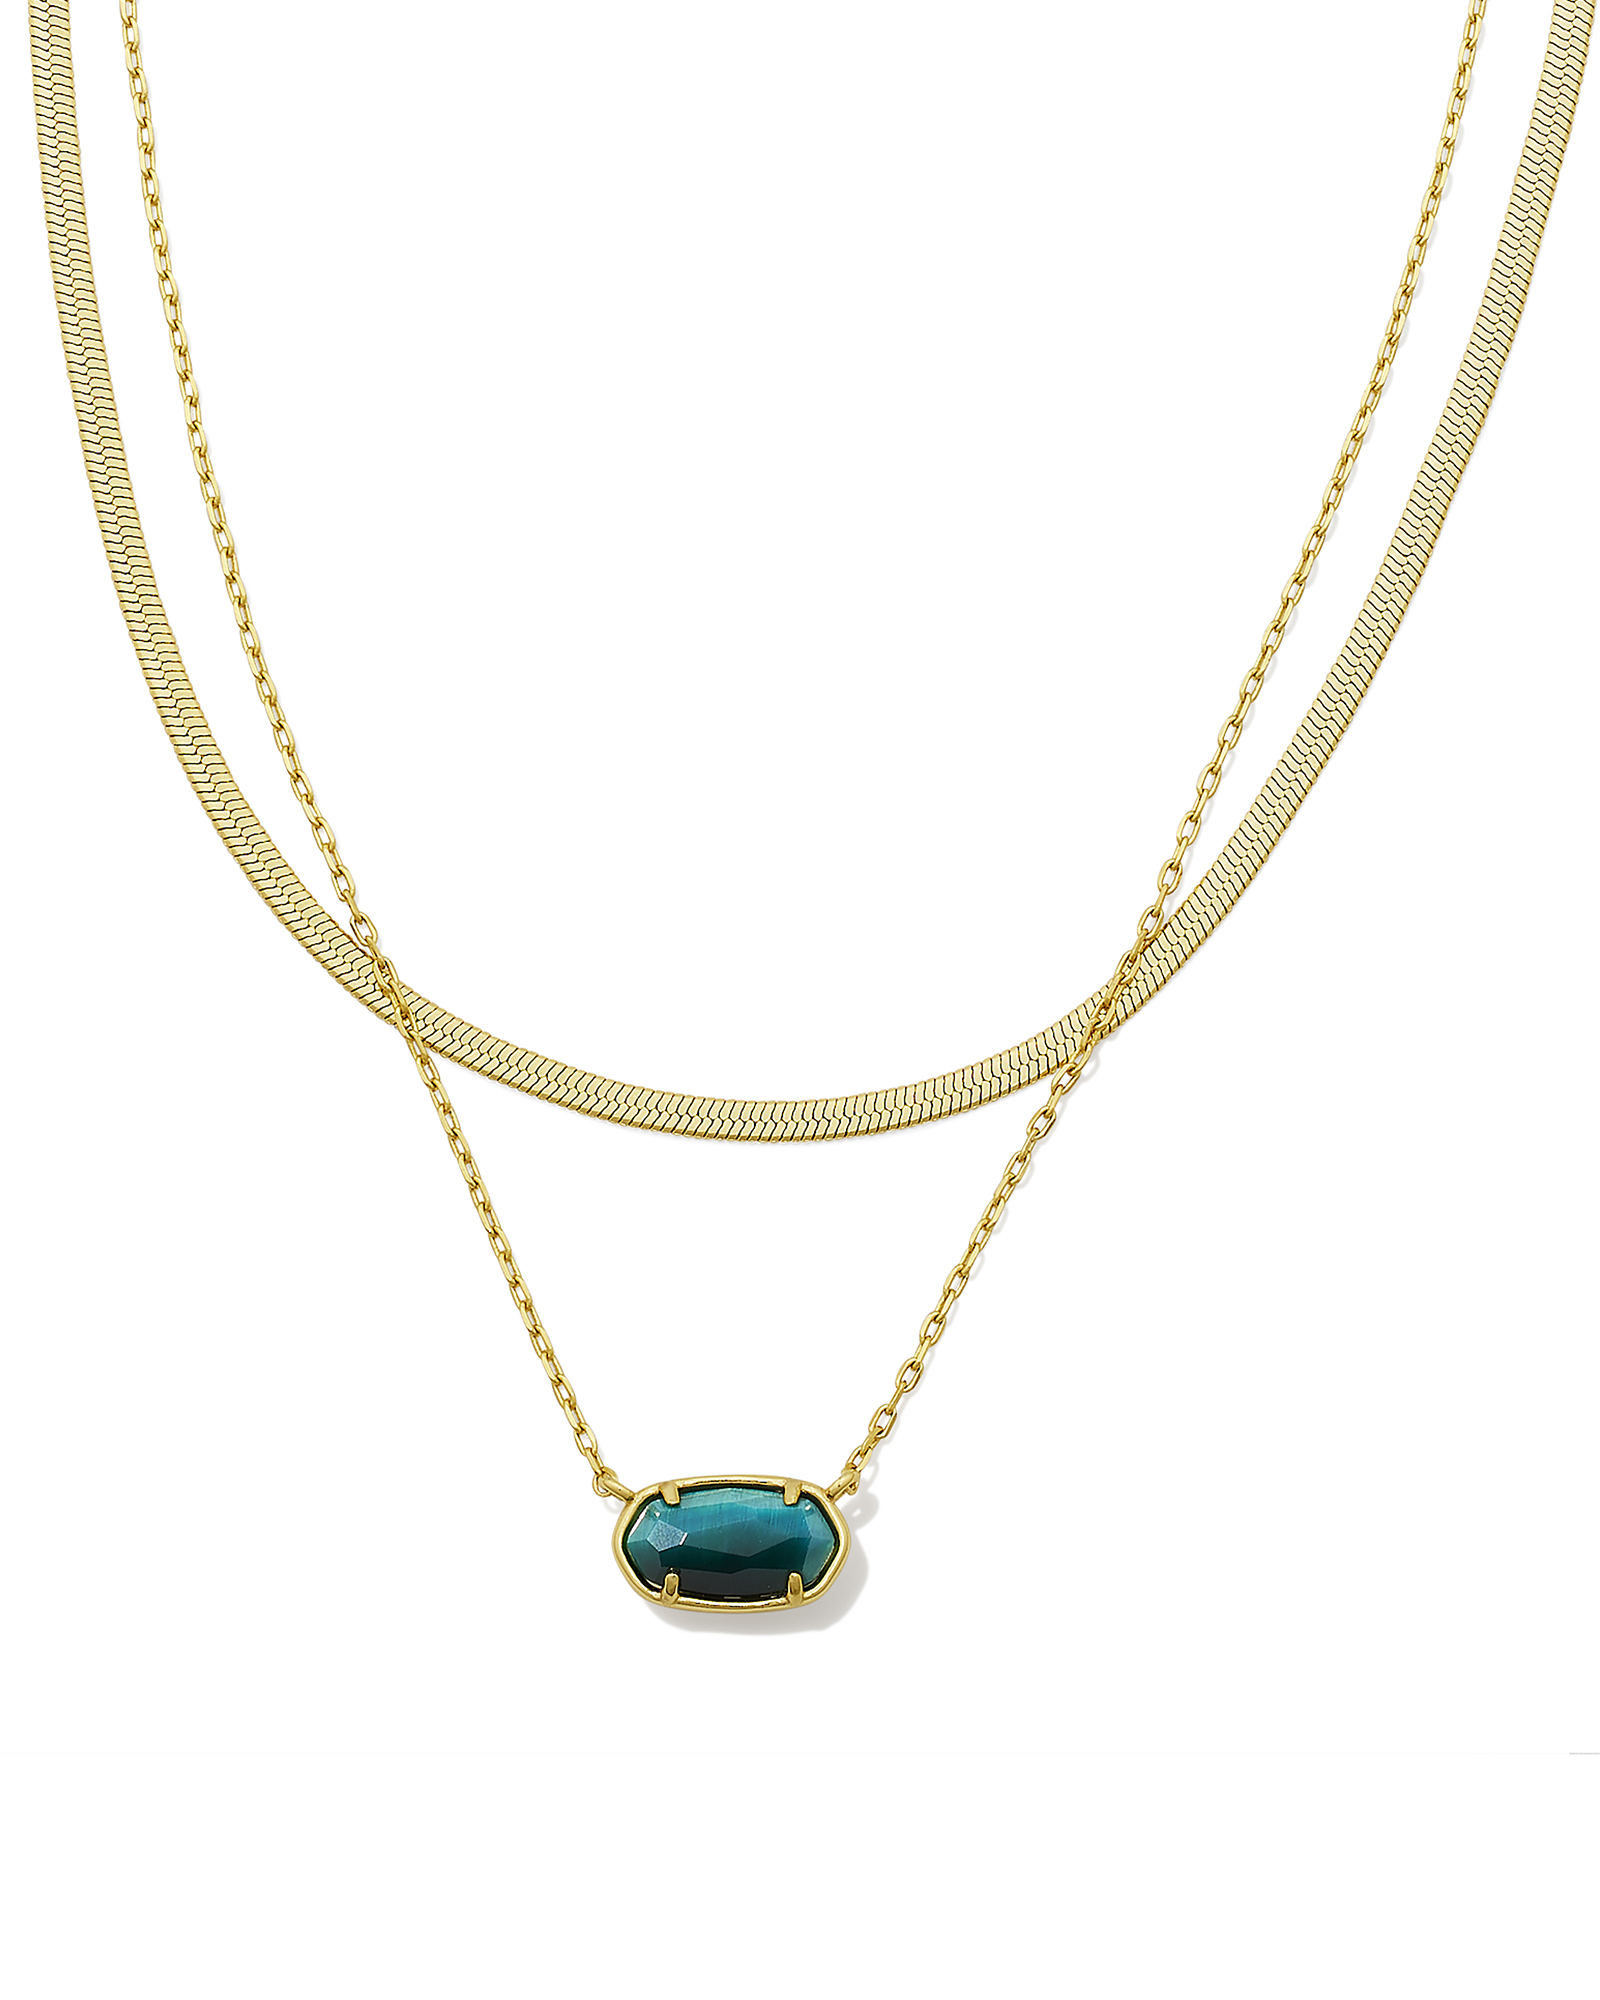 Kendra Scott Grayson Short Pendant Necklace in Green Illusion | REEDS  Jewelers